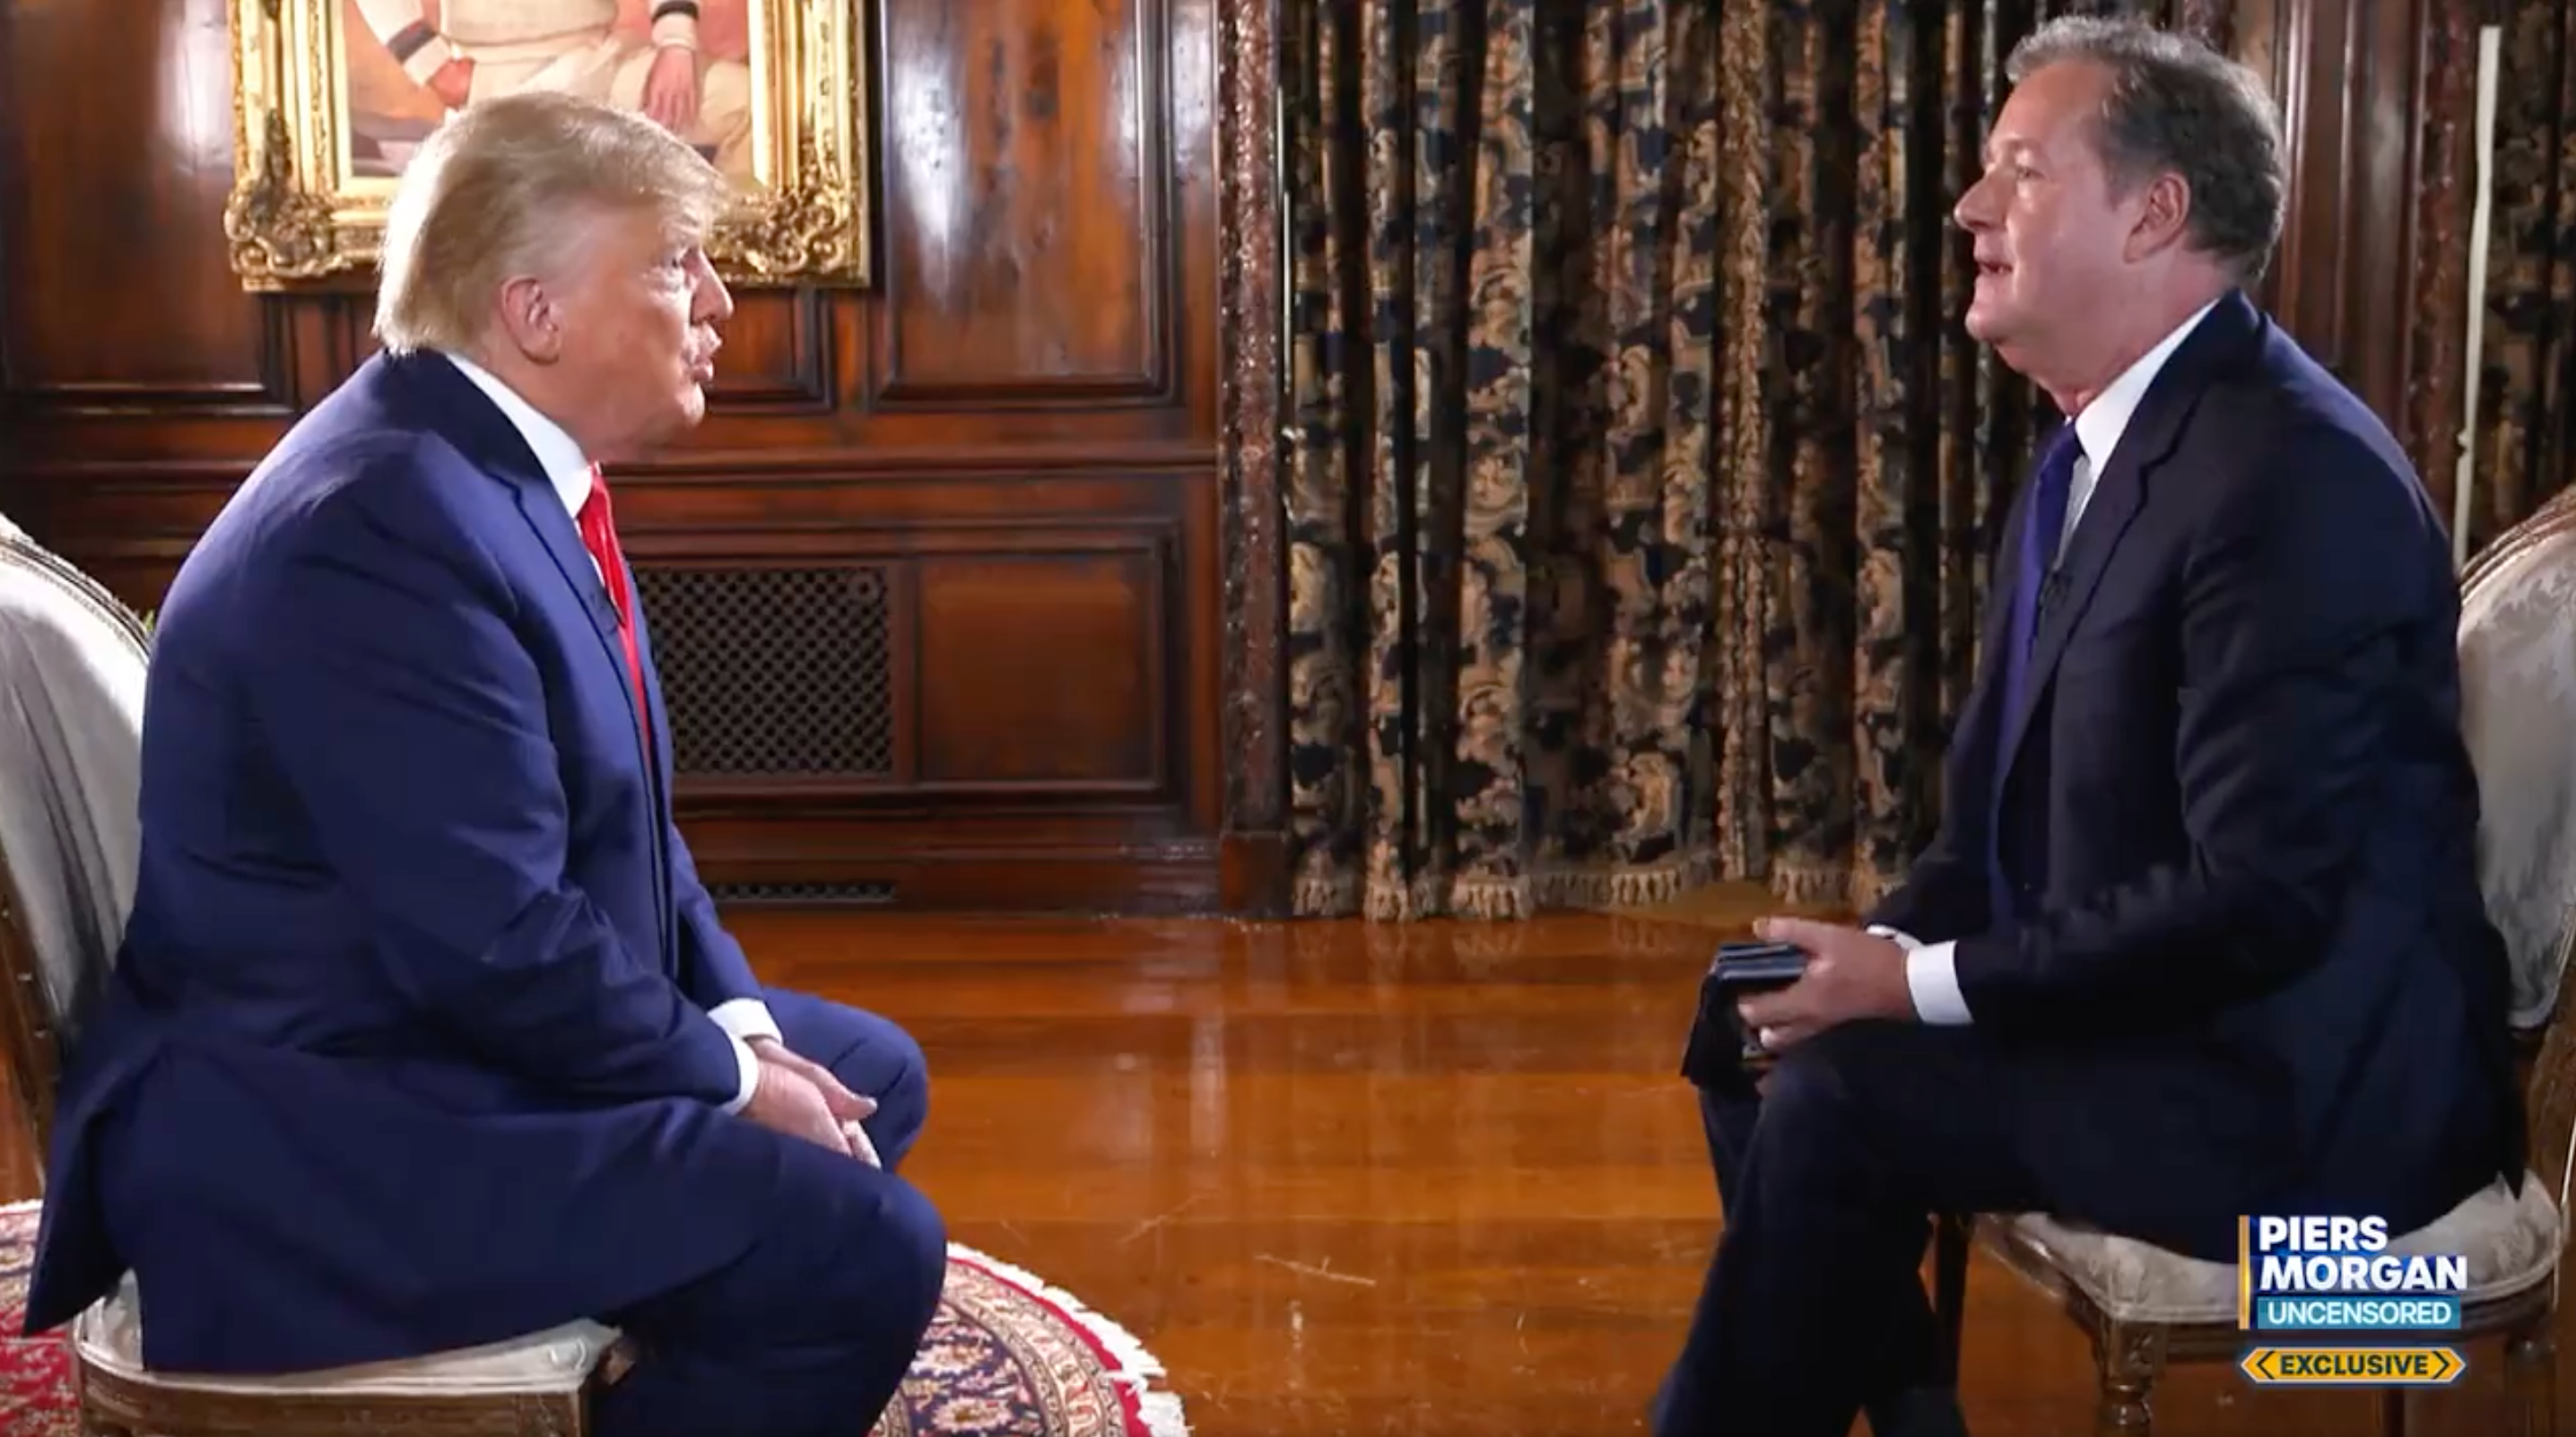 Donald Trump is interviewed by Piers Morgan